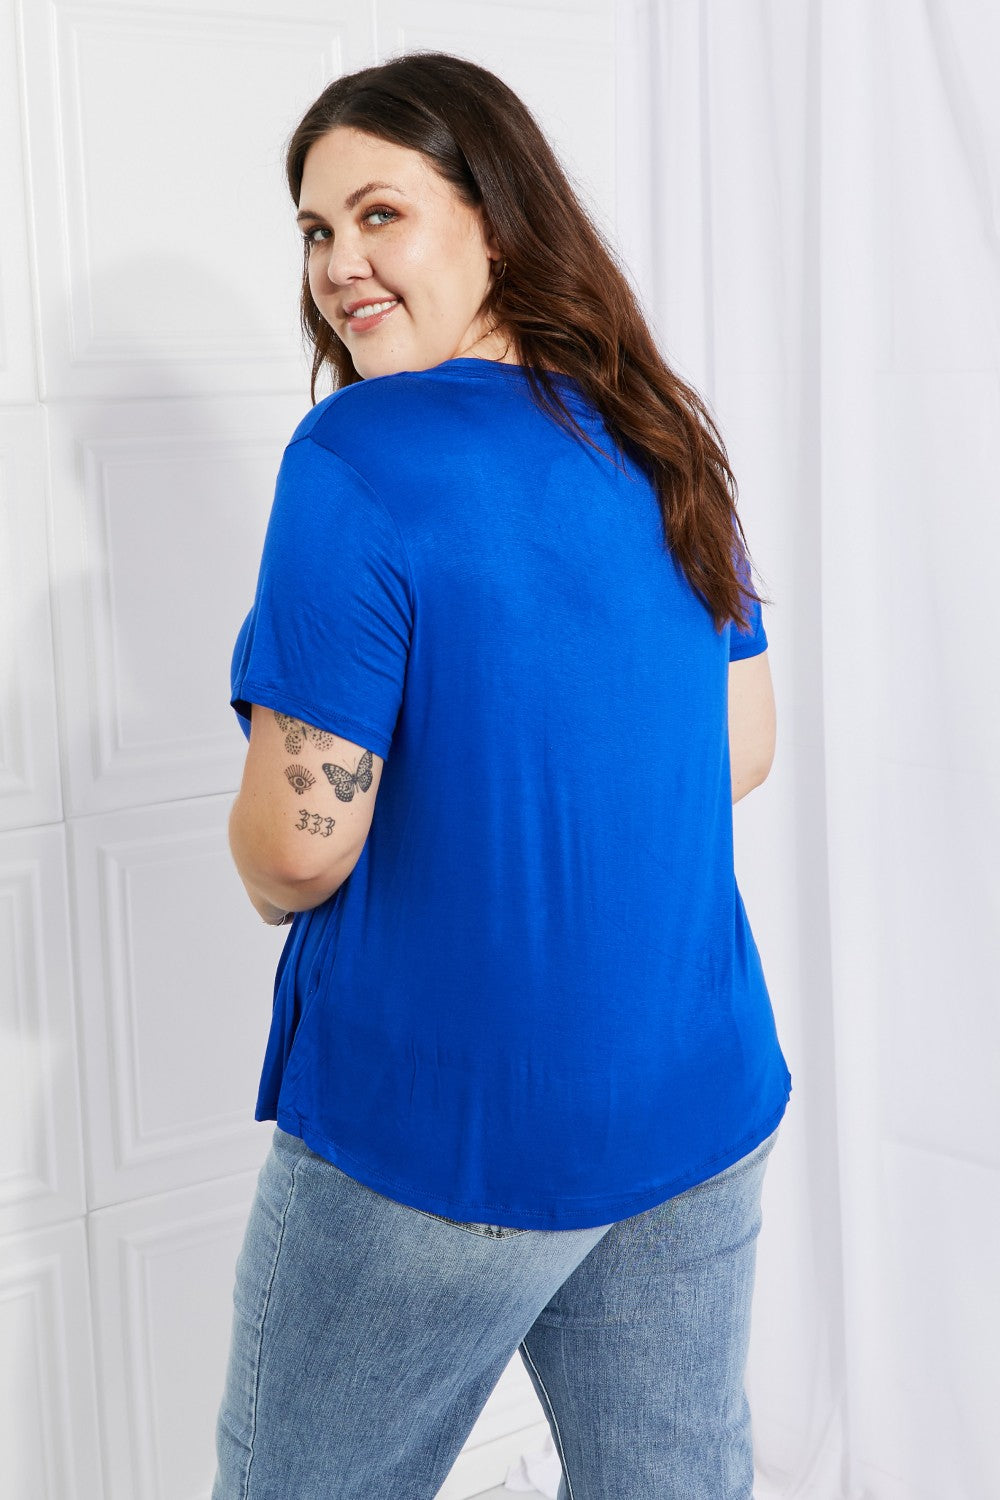 Women’s Culture Code Full Size Instant Connection V-Neck Tee